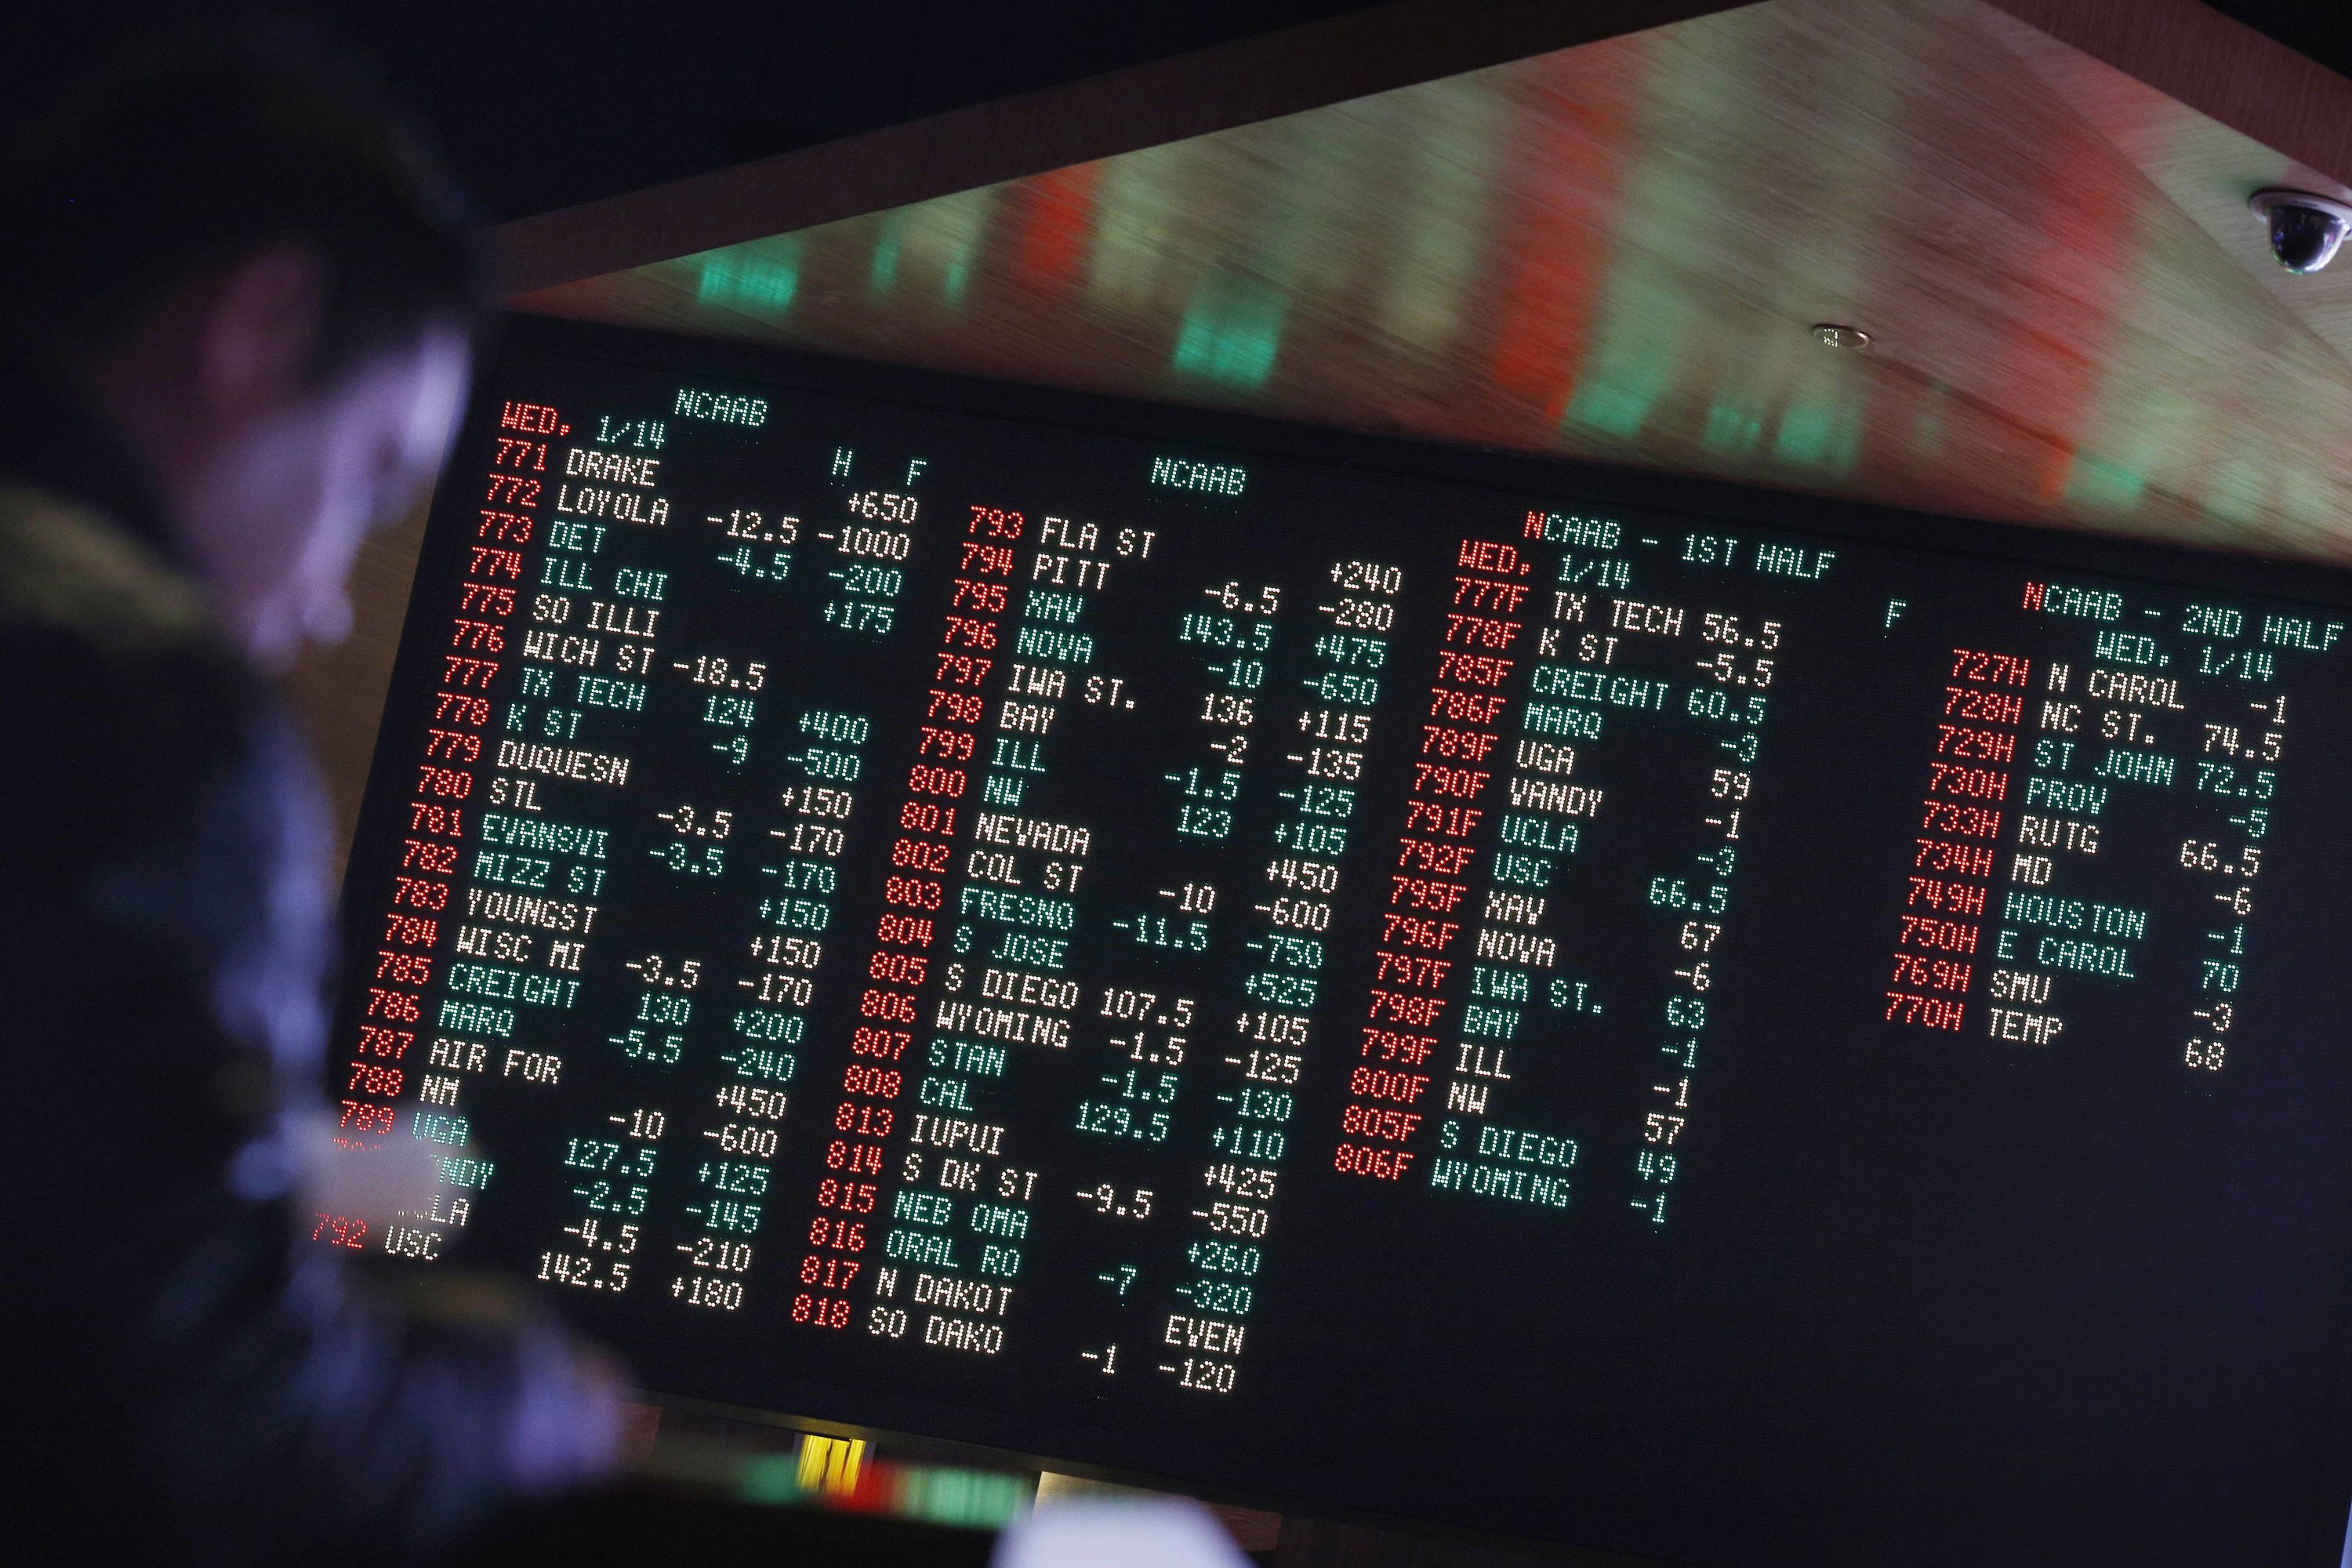 Sports betting companies gear up for Super Bowl weekend